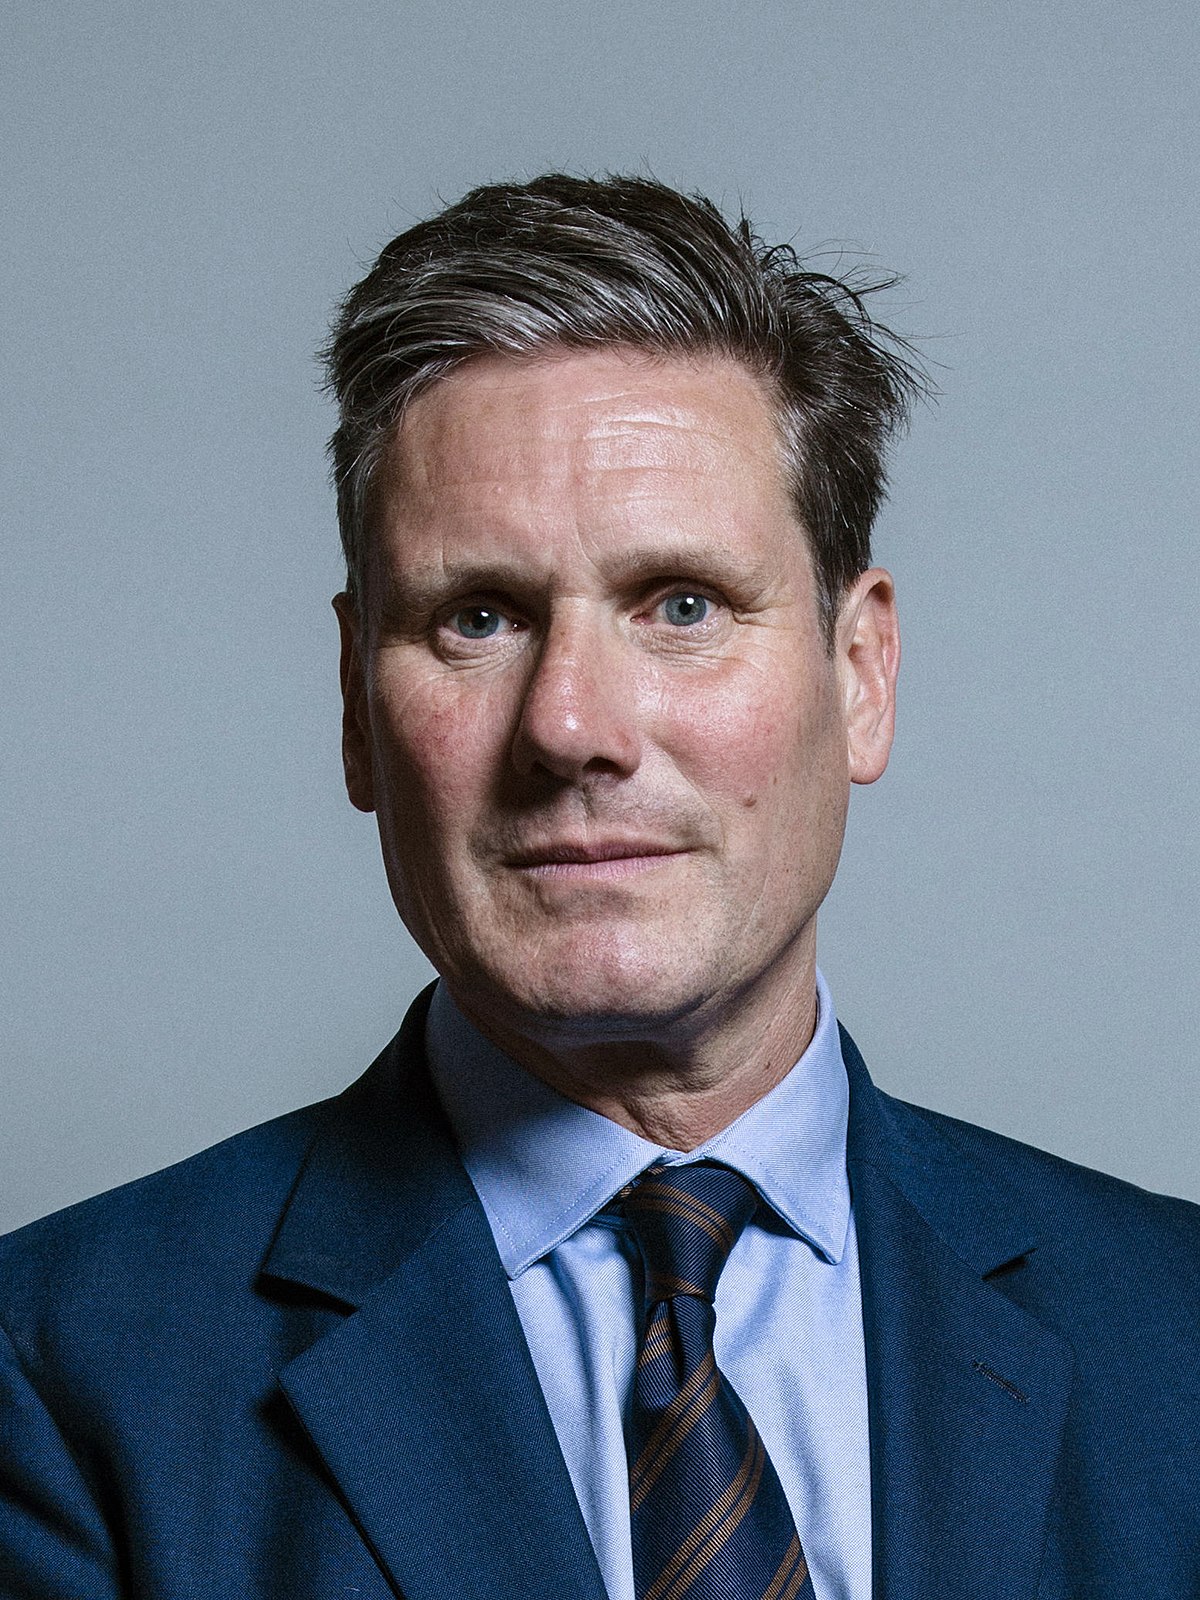 Keir Starmer The Road Ahead Essay All the key Themes and Messages!